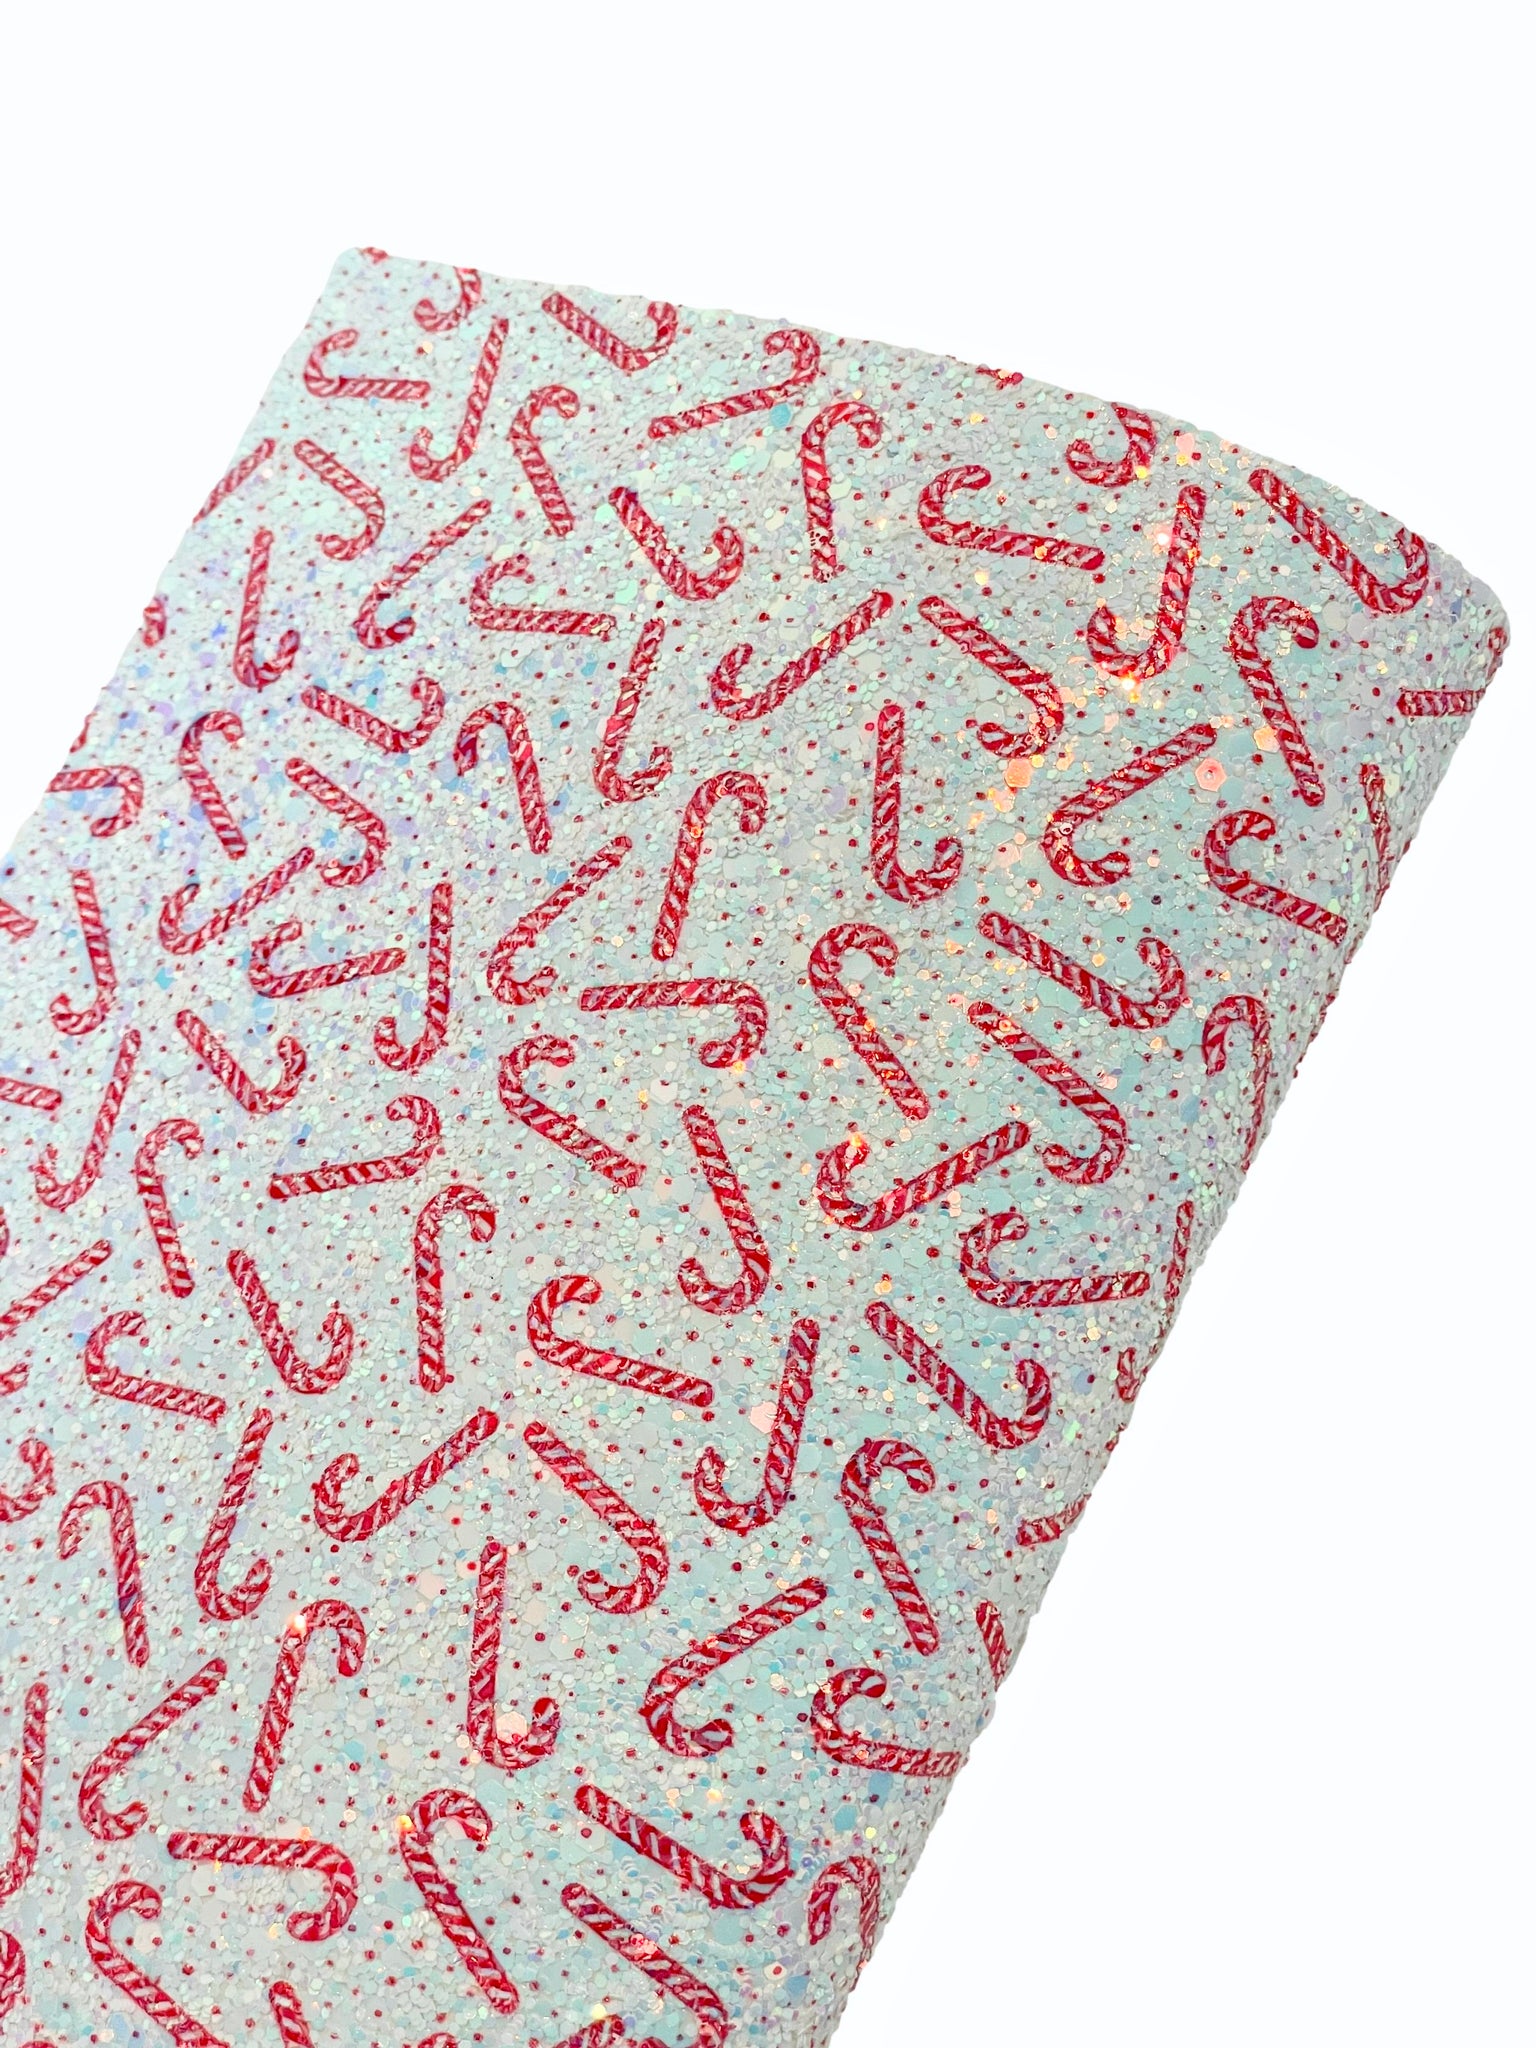 NEW! Iridescent Candy Canes Chunky Glitter w/ Felt Backing-READY TO SHIP